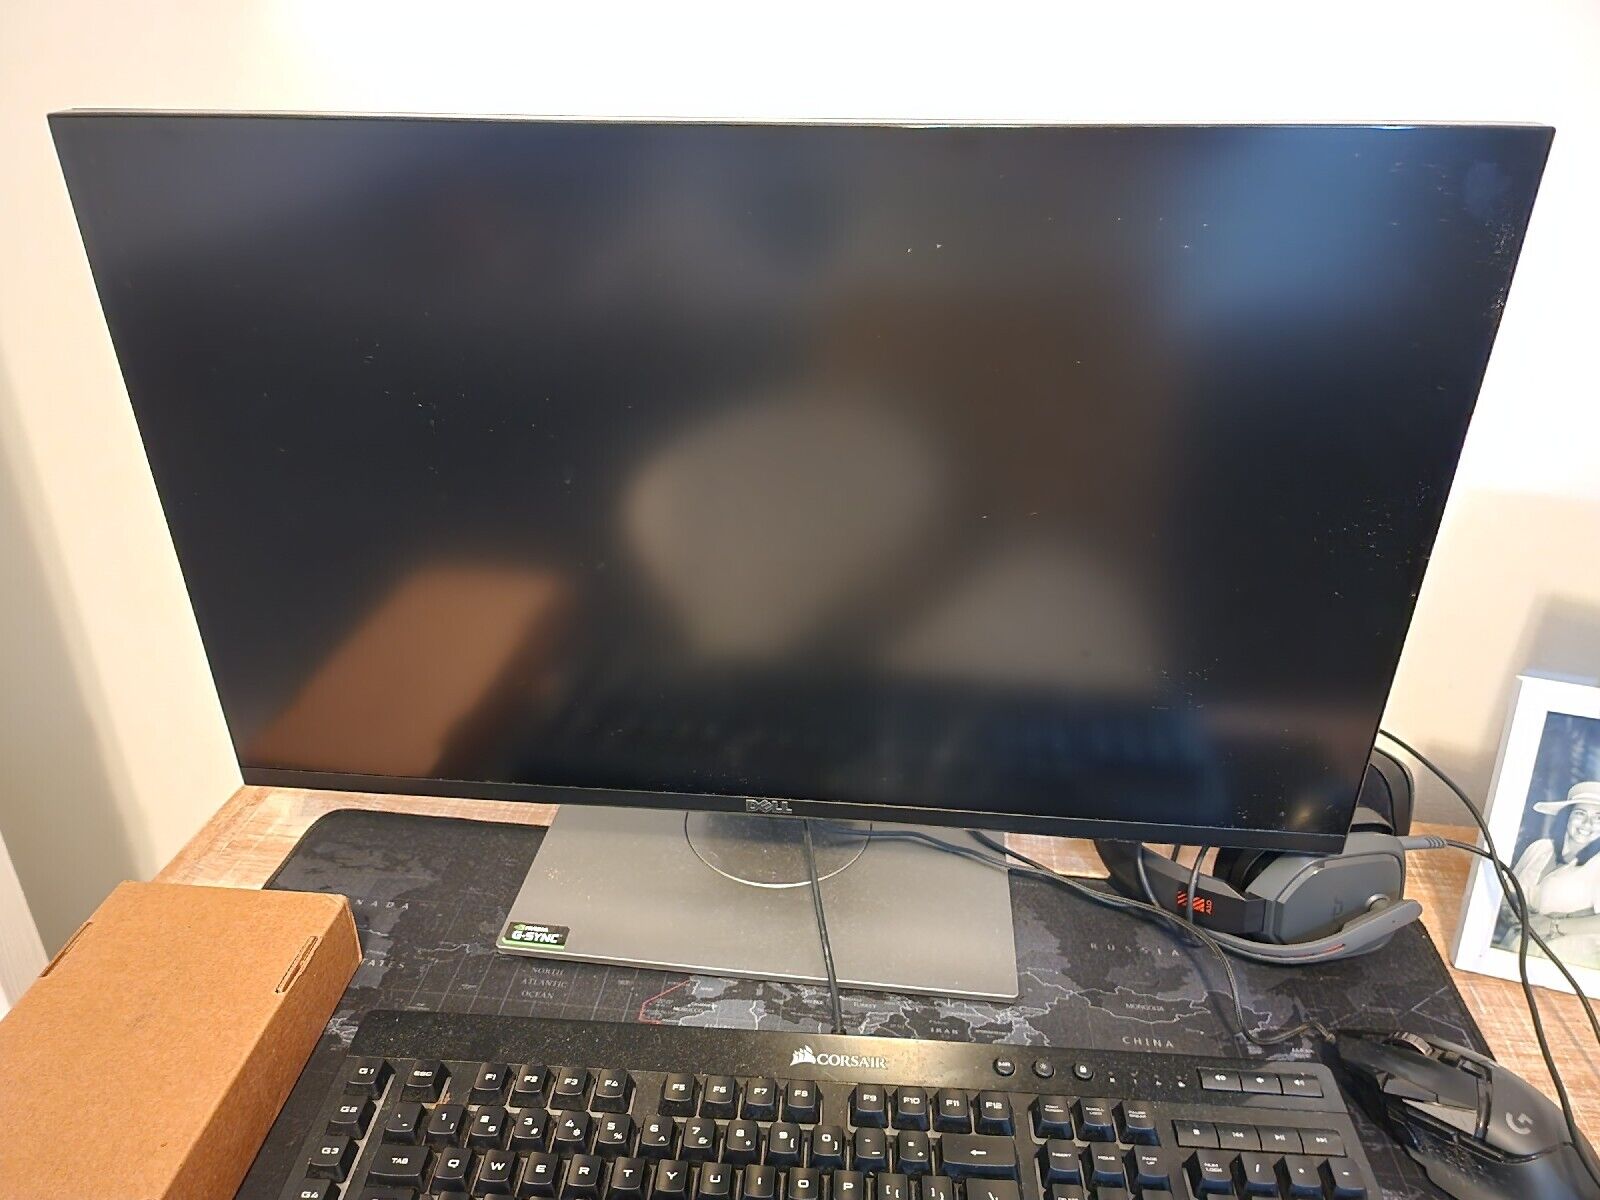 Dell S Series S2716DG 27 inch Widescreen LCD Monitor. 144hz, gaming monitor